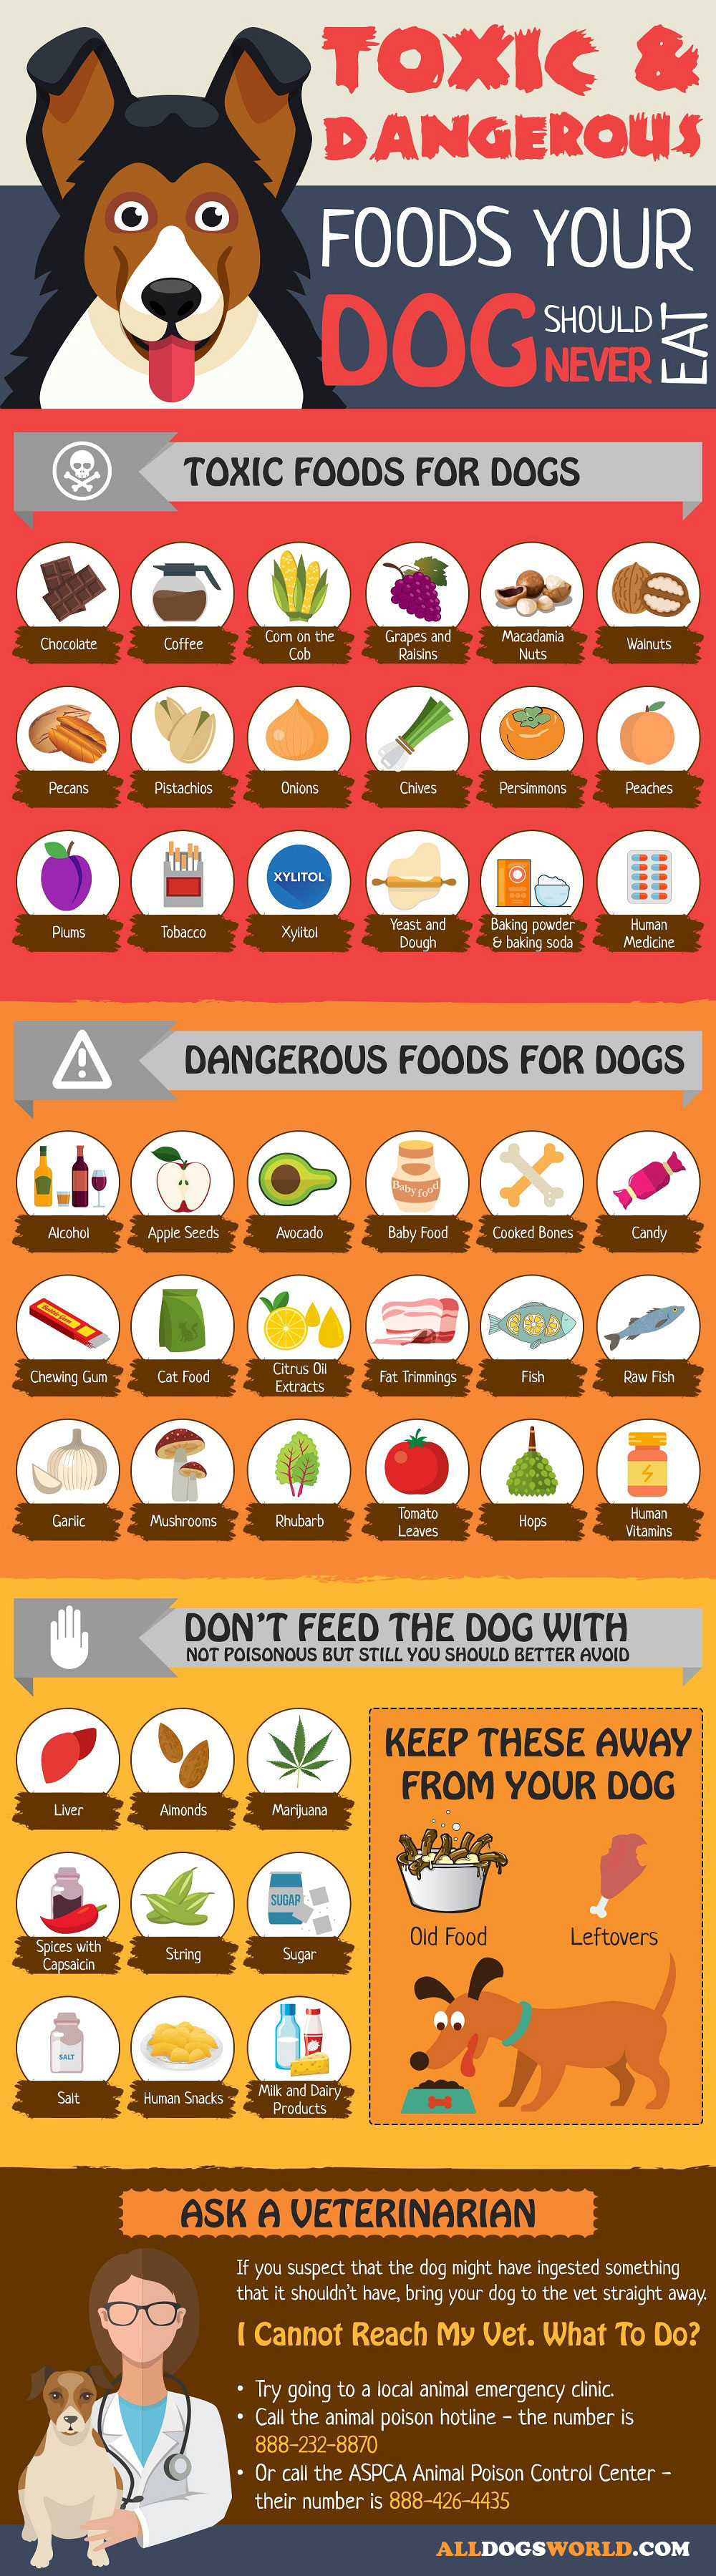 Toxic Foods for Dogs List Dangerous foods for dogs